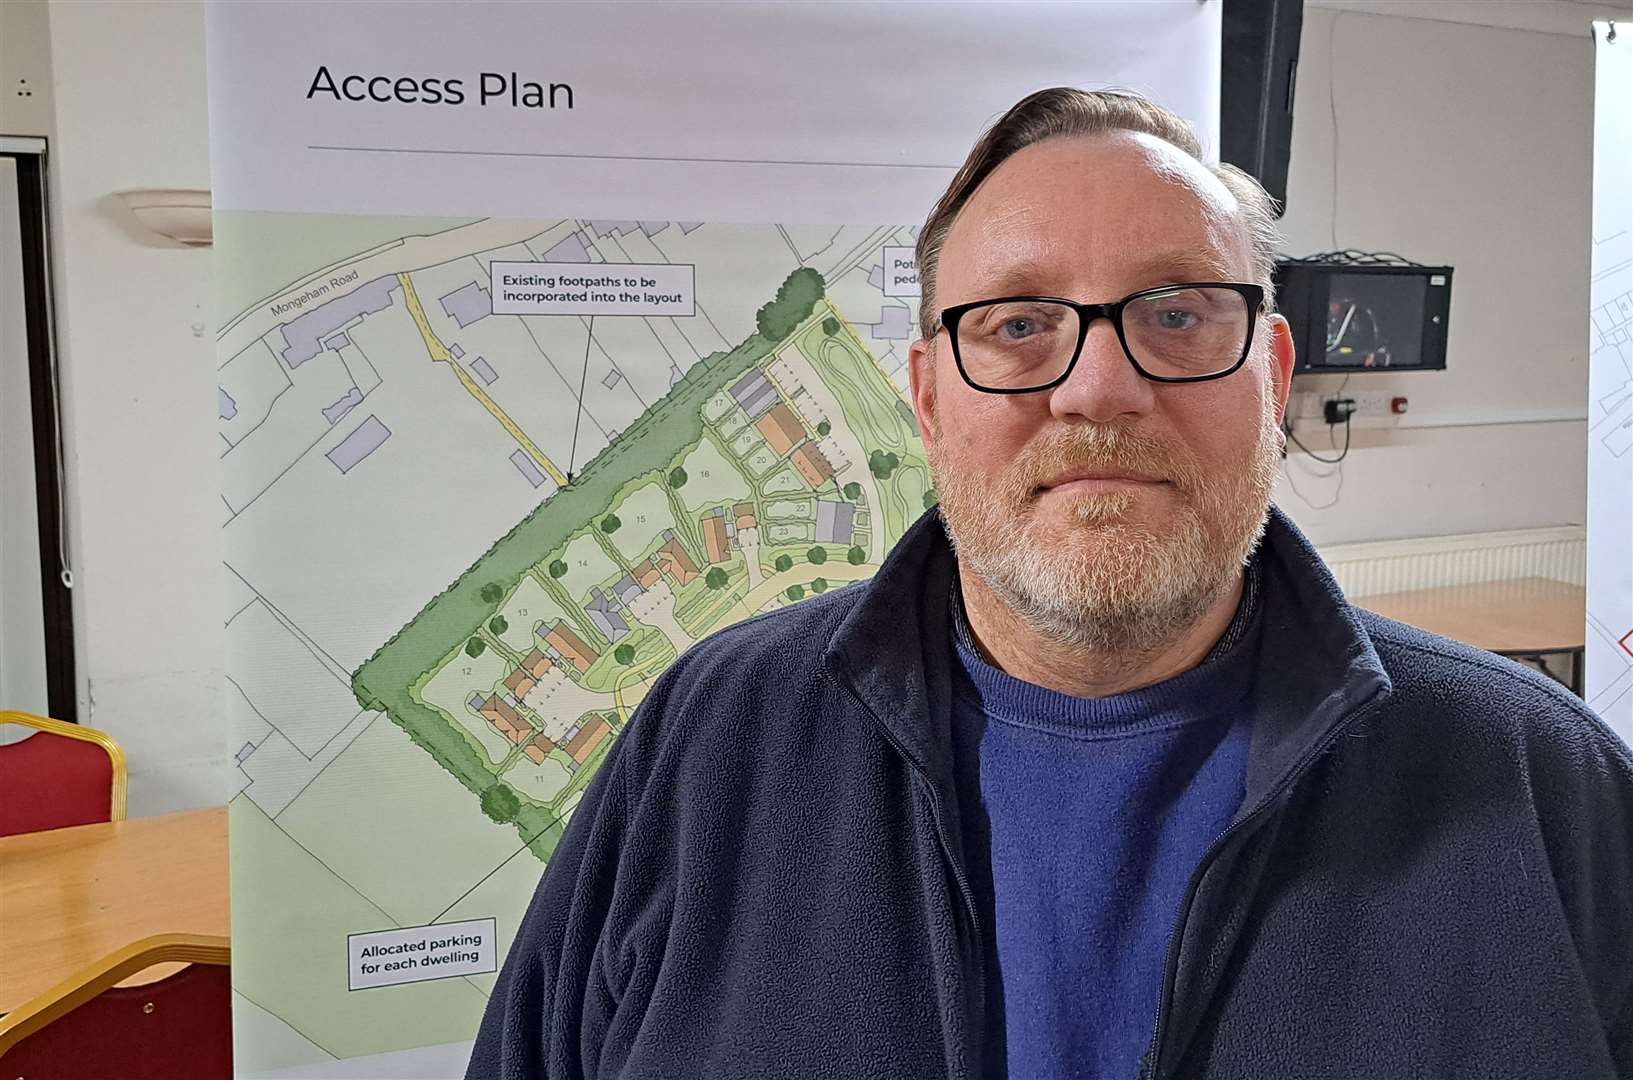 Resident David Harmes says he is "not keen" on the development